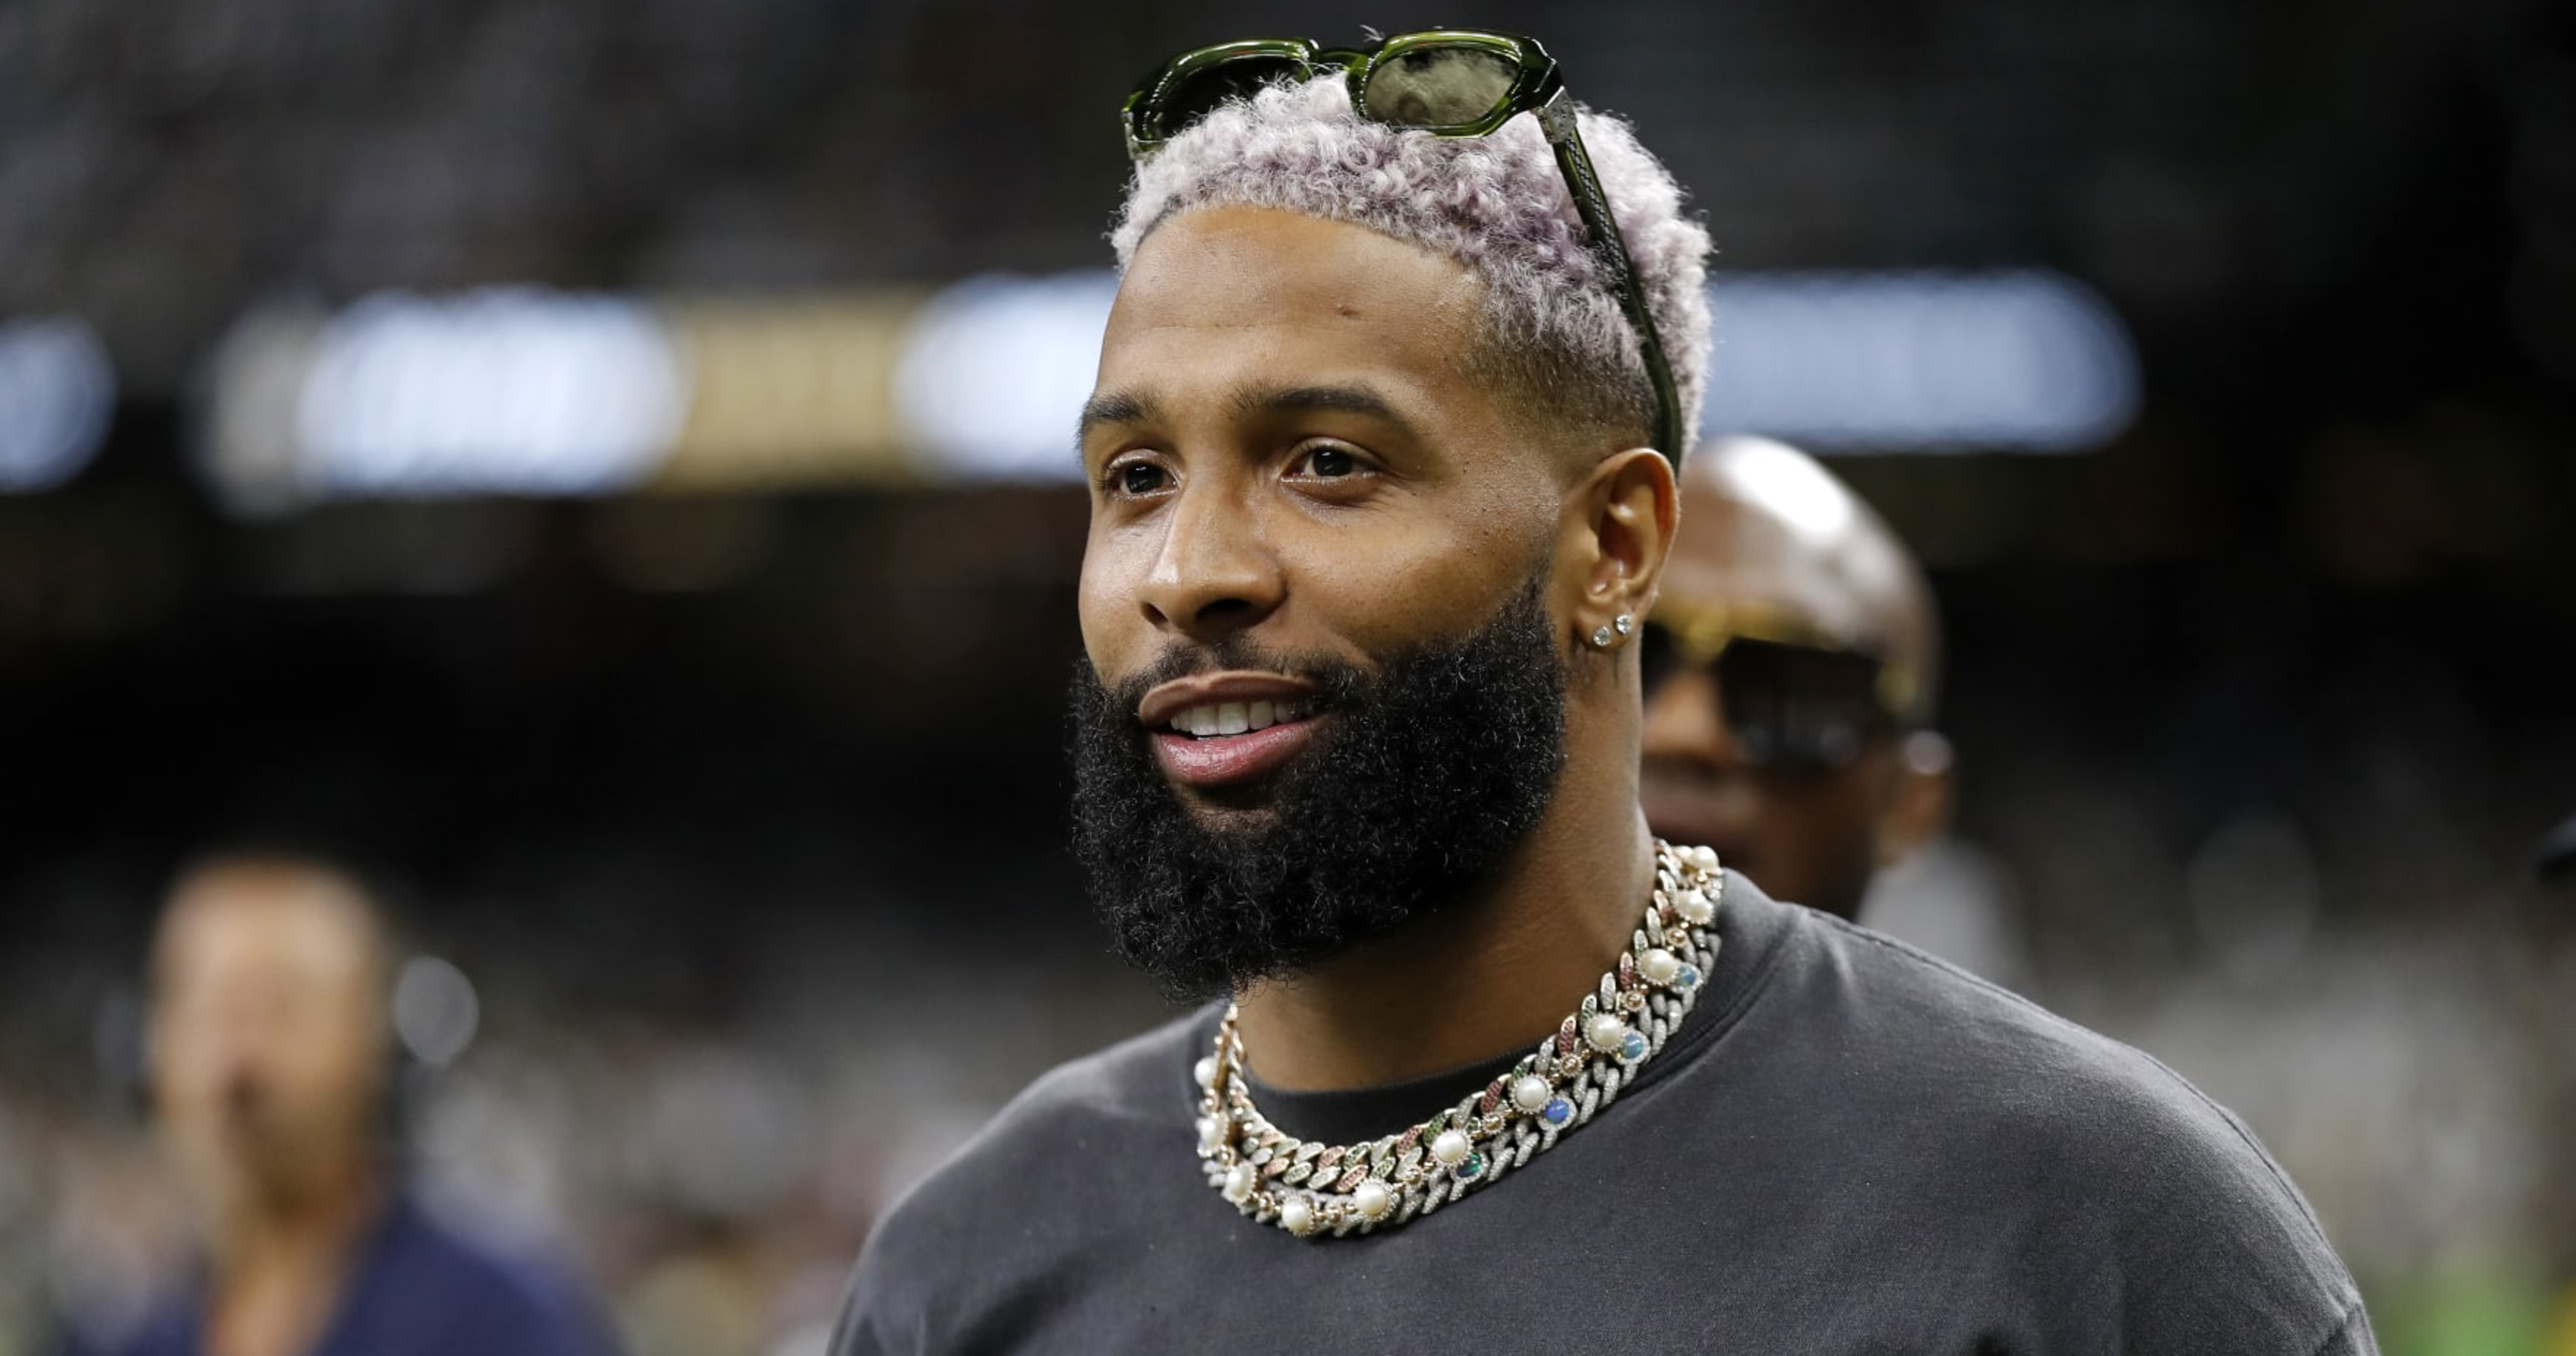 Cowboys Rumors: Odell Beckham Jr. Expected to Make Visit in Early December